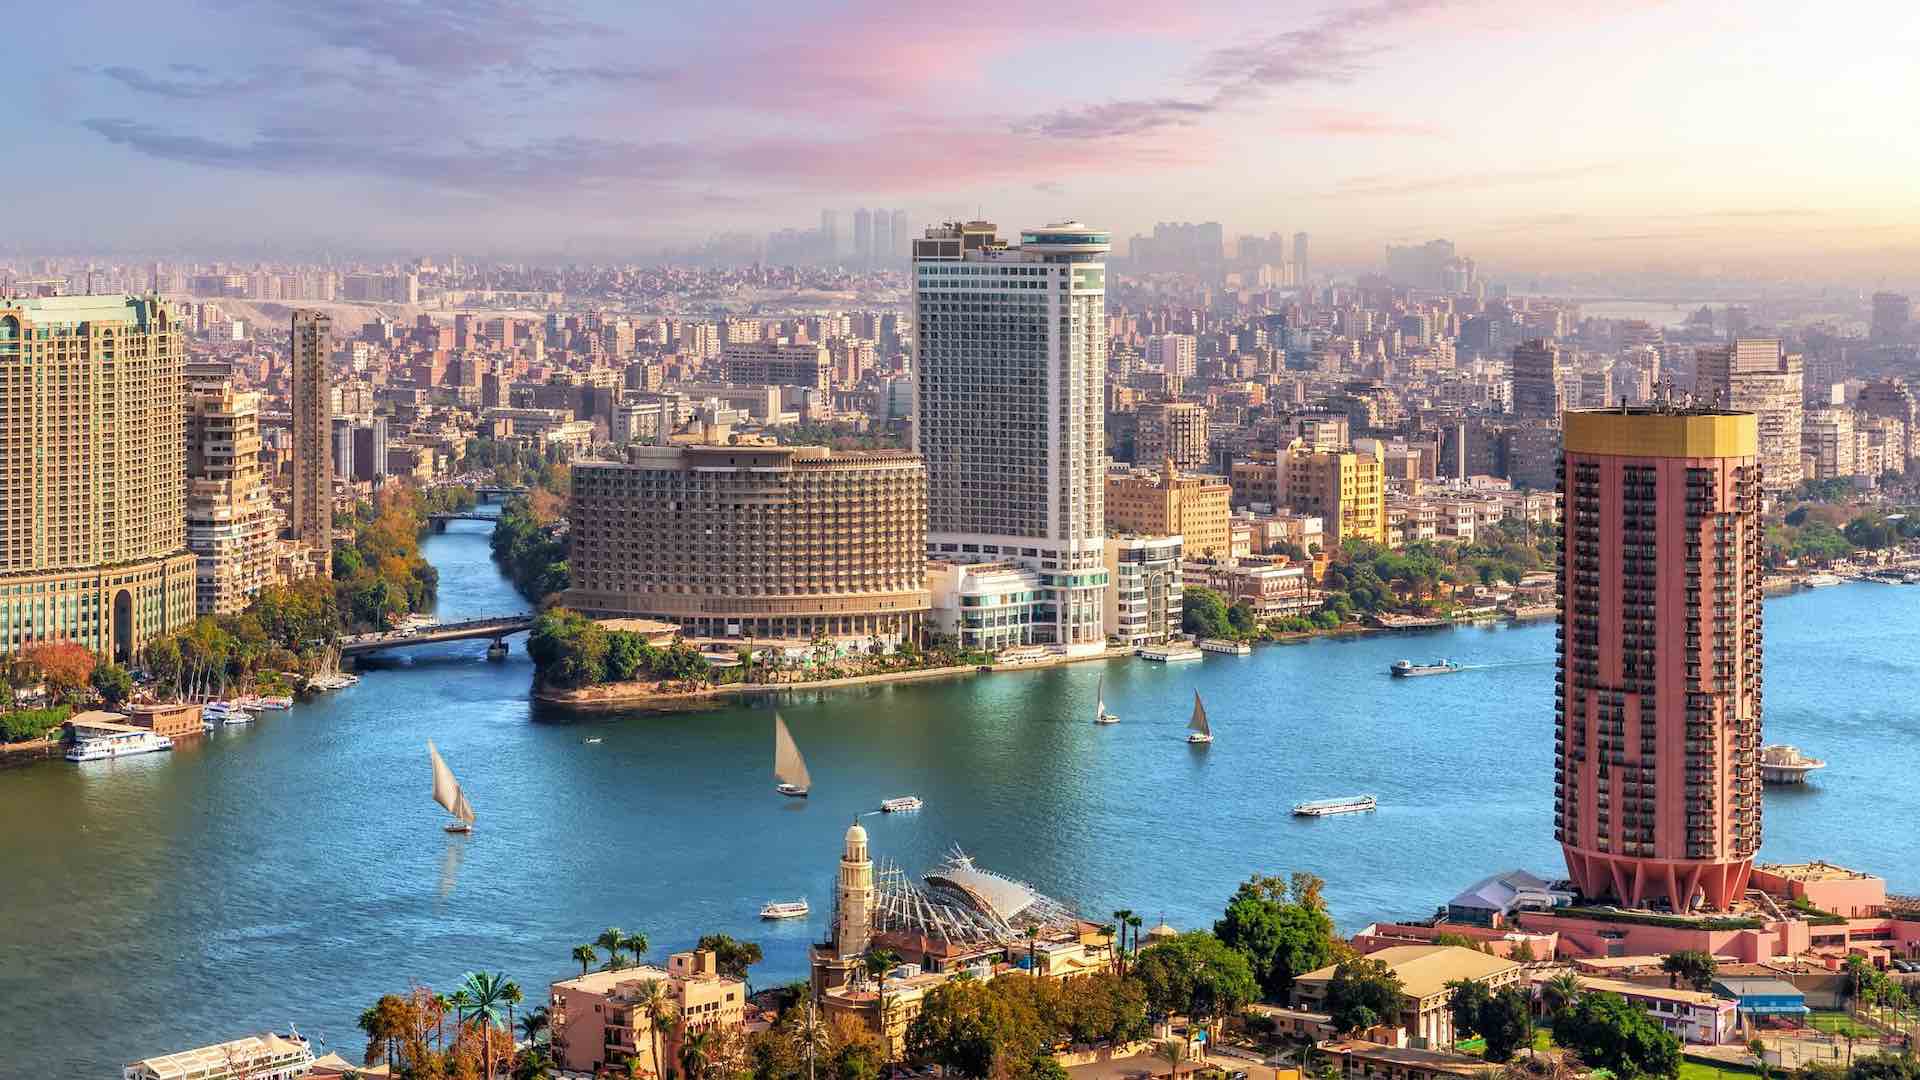 Egyptian GDP grew 6.6 percent in FY 2021/22 - Prime Minister